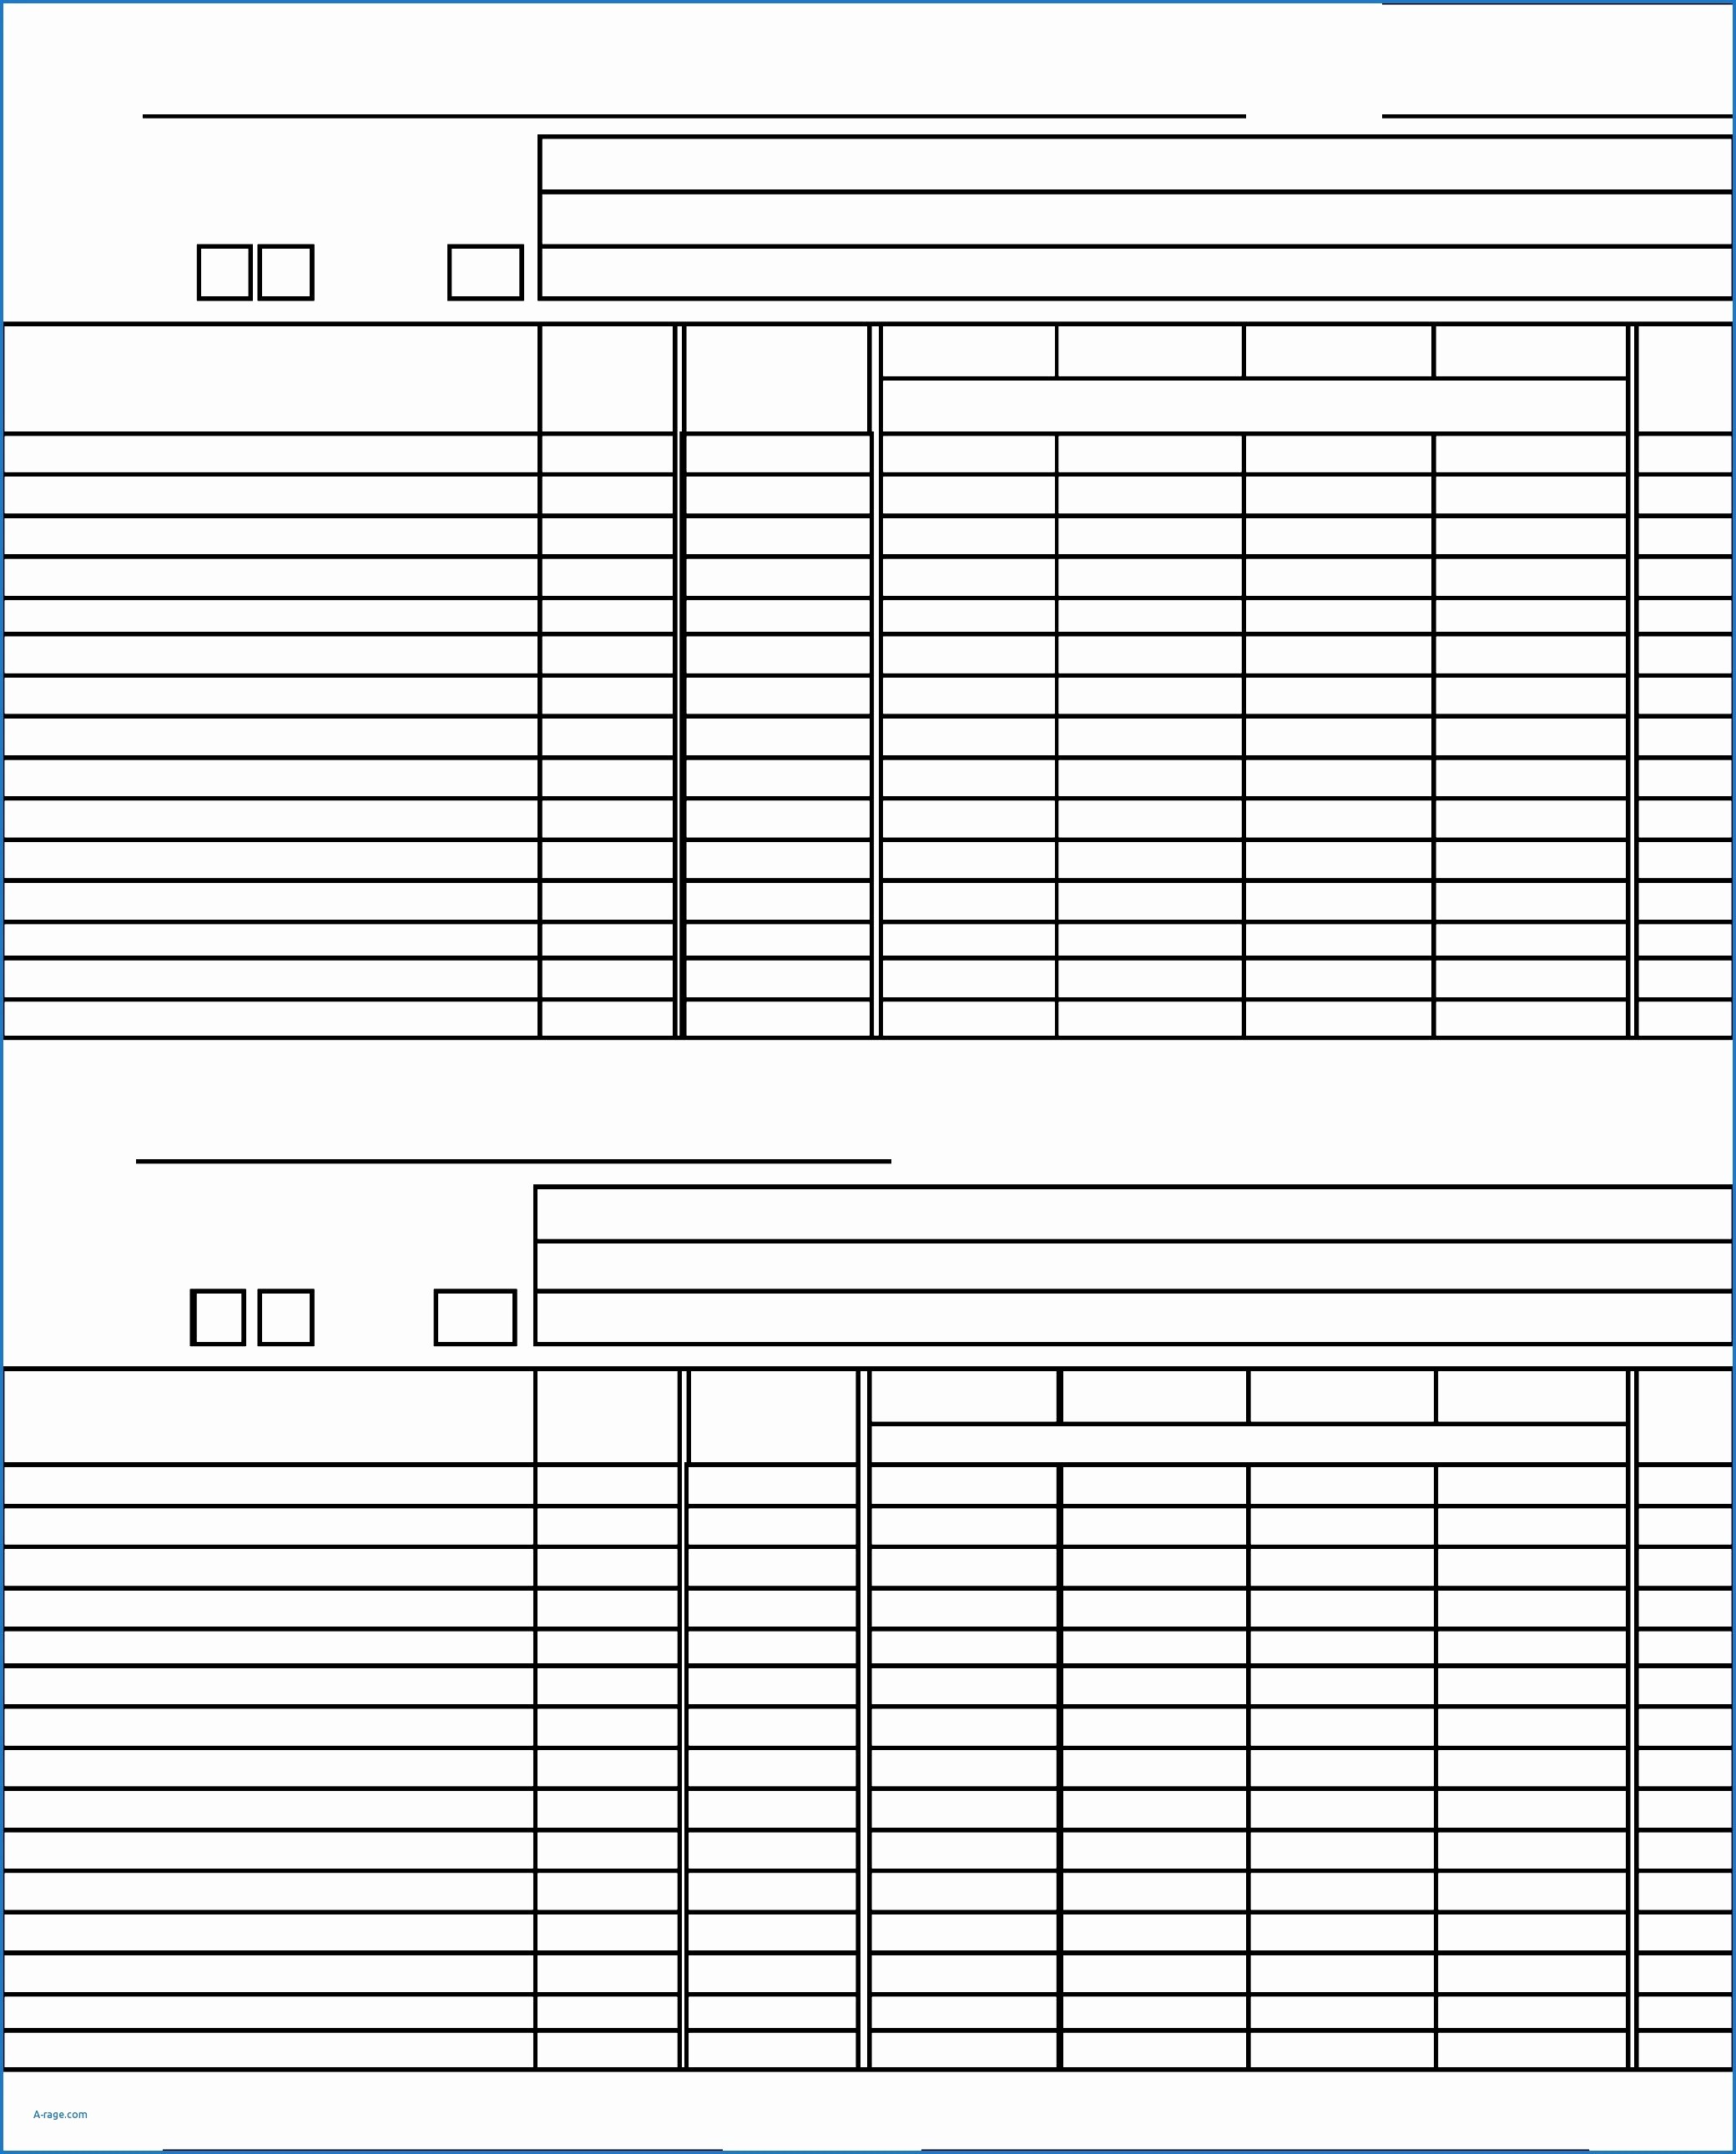 Golf Stat Tracker Book Awesome Spreadsheet Unique Document